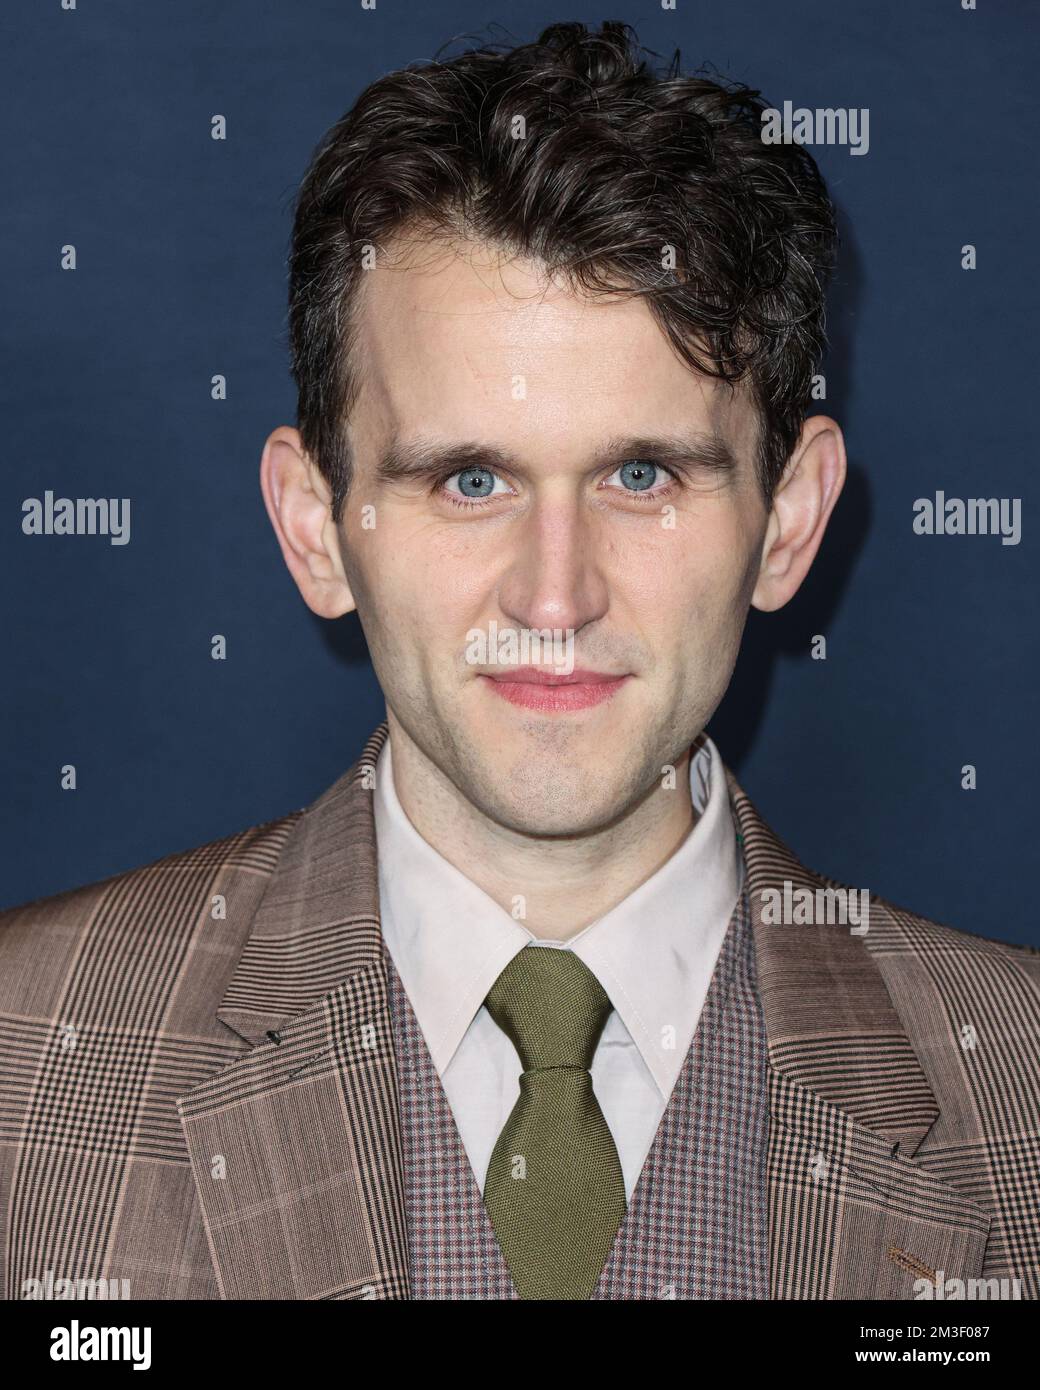 https://c8.alamy.com/comp/2M3F087/los-angeles-california-usa-december-14-english-actor-harry-melling-arrives-at-the-los-angeles-premiere-of-netflixs-the-pale-blue-eye-held-at-the-directors-guild-of-america-theater-complex-on-december-14-2022-in-los-angeles-california-united-states-photo-by-xavier-collinimage-press-agency-2M3F087.jpg